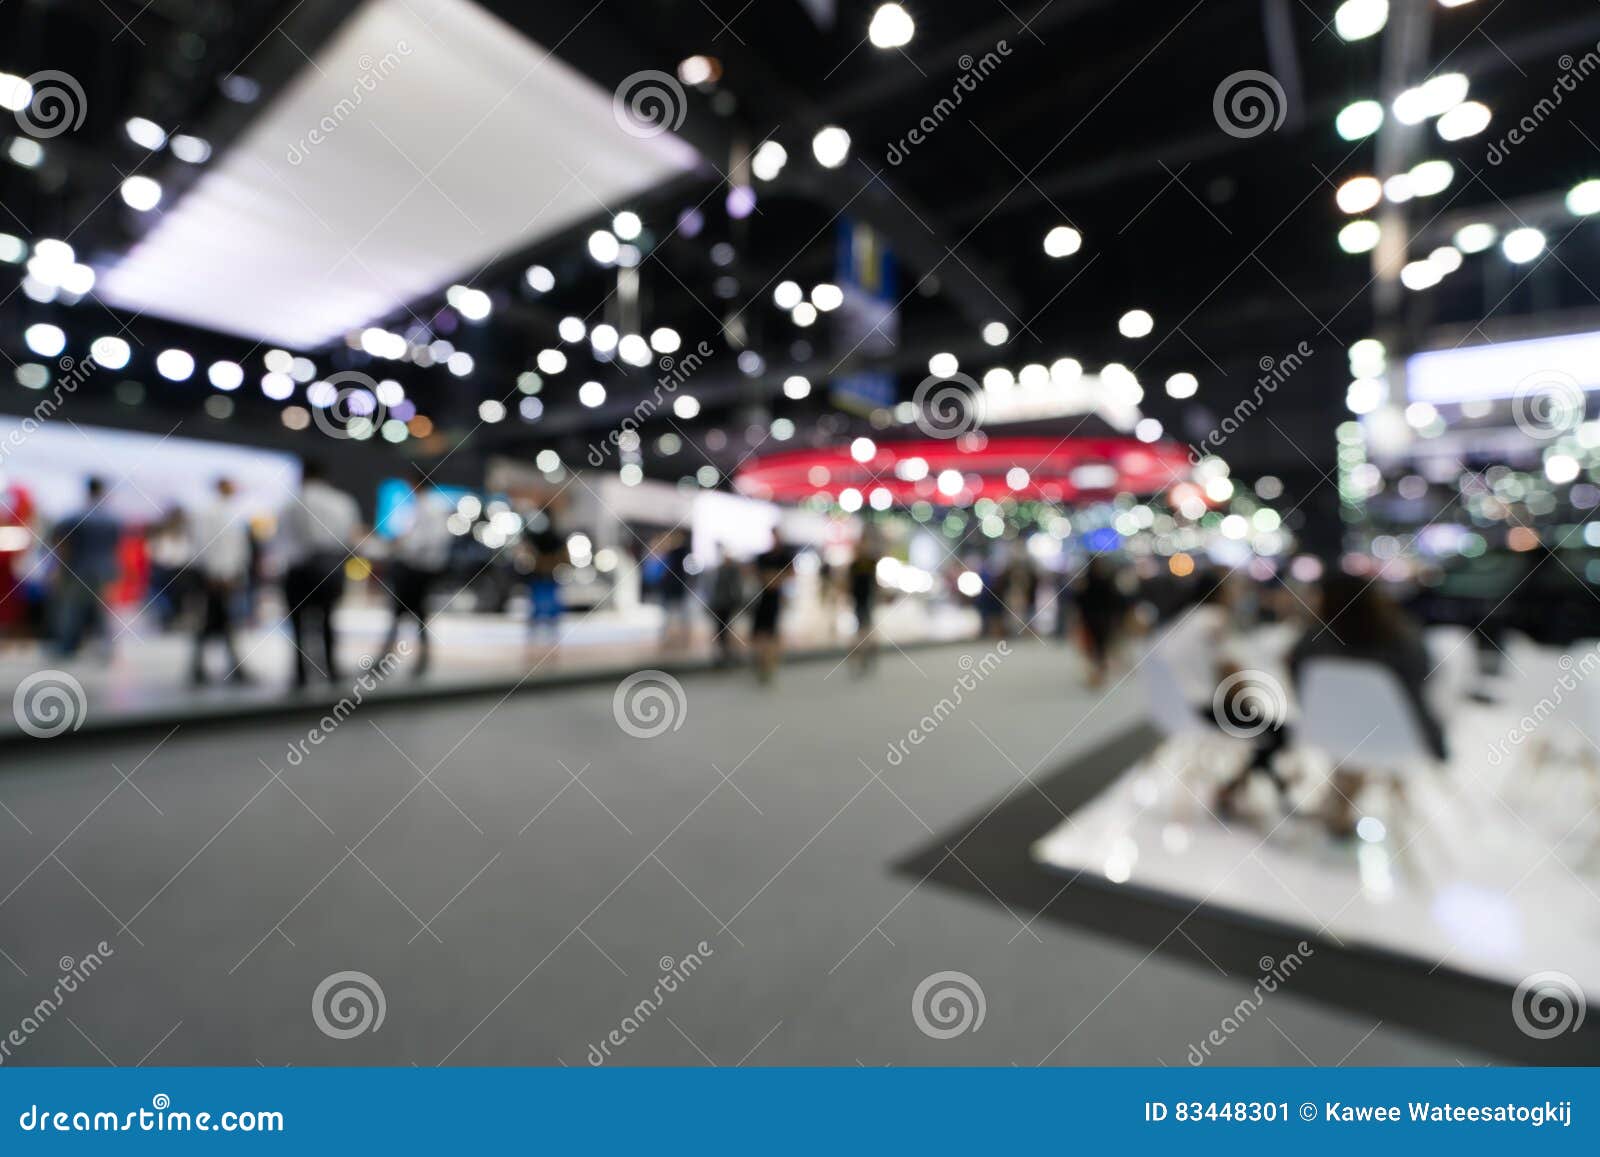 blurred, defocused background of public event exhibition hall, business trade show concept